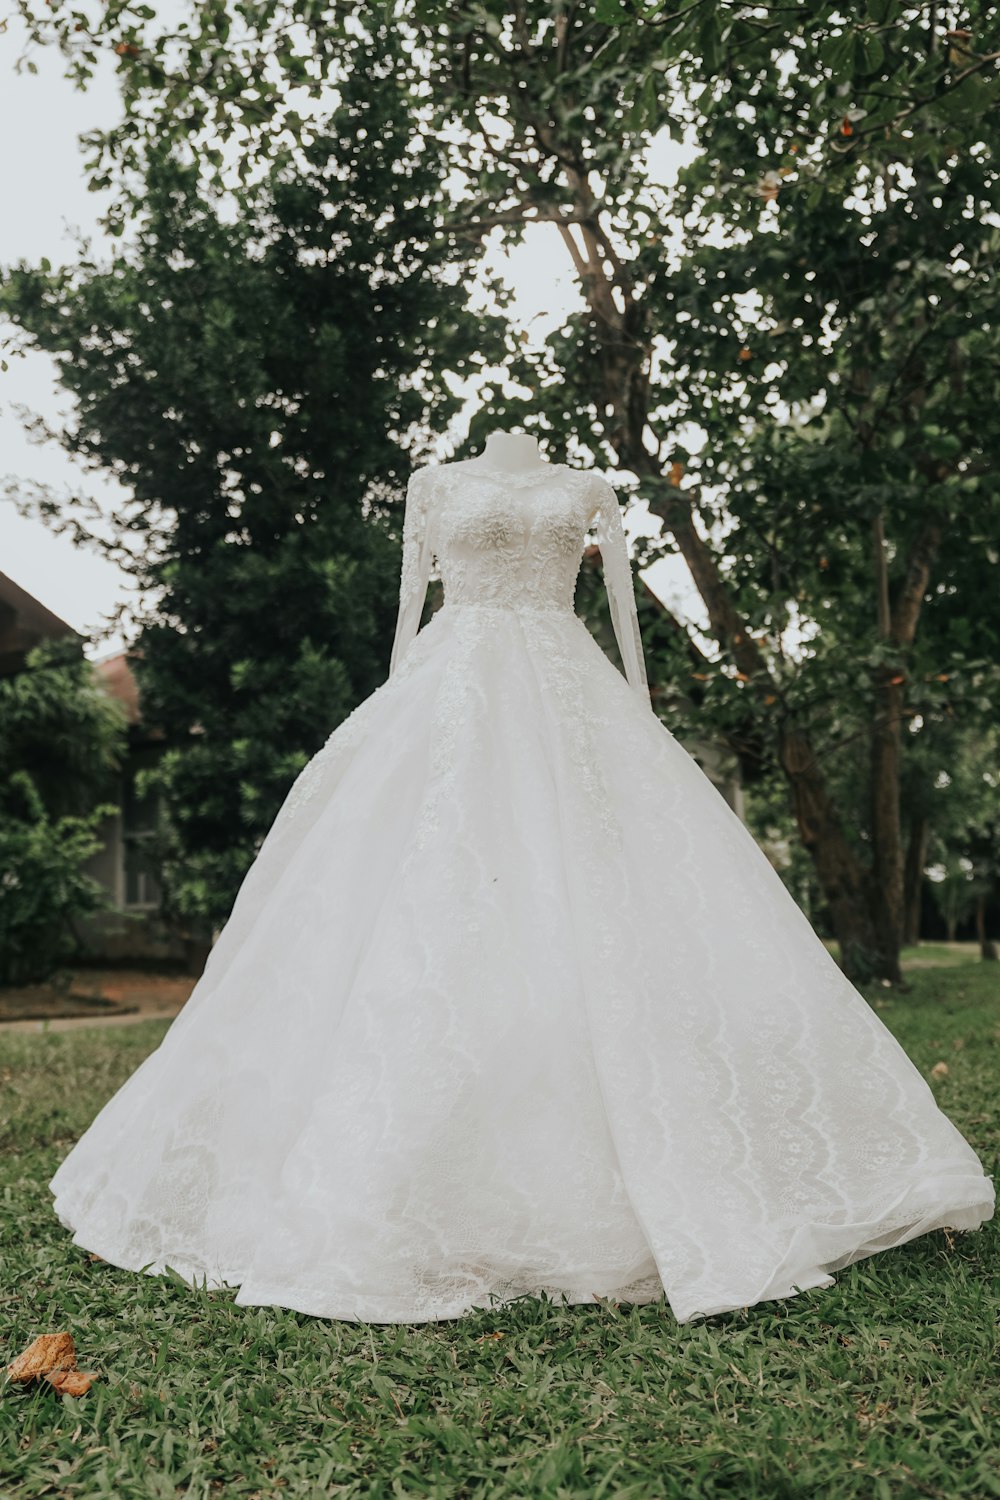 a wedding dress on display in the grass